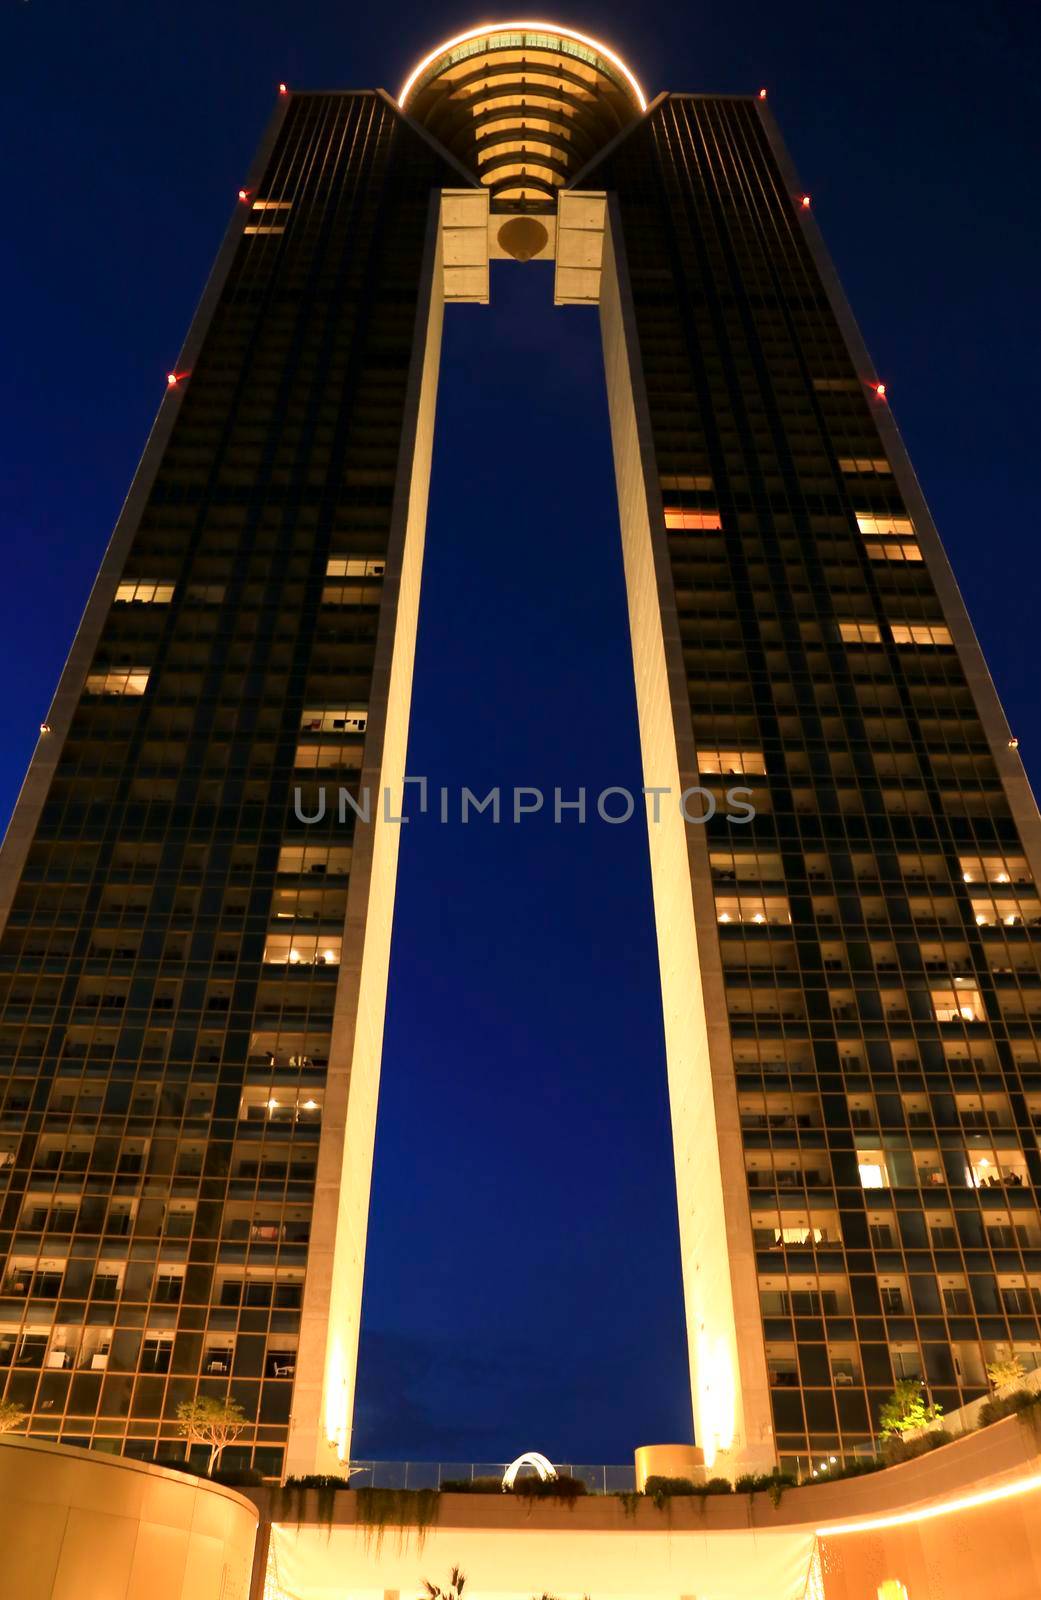 Modern architecture building called Intempo on the Poniente beach Area in Benidorm at night by soniabonet